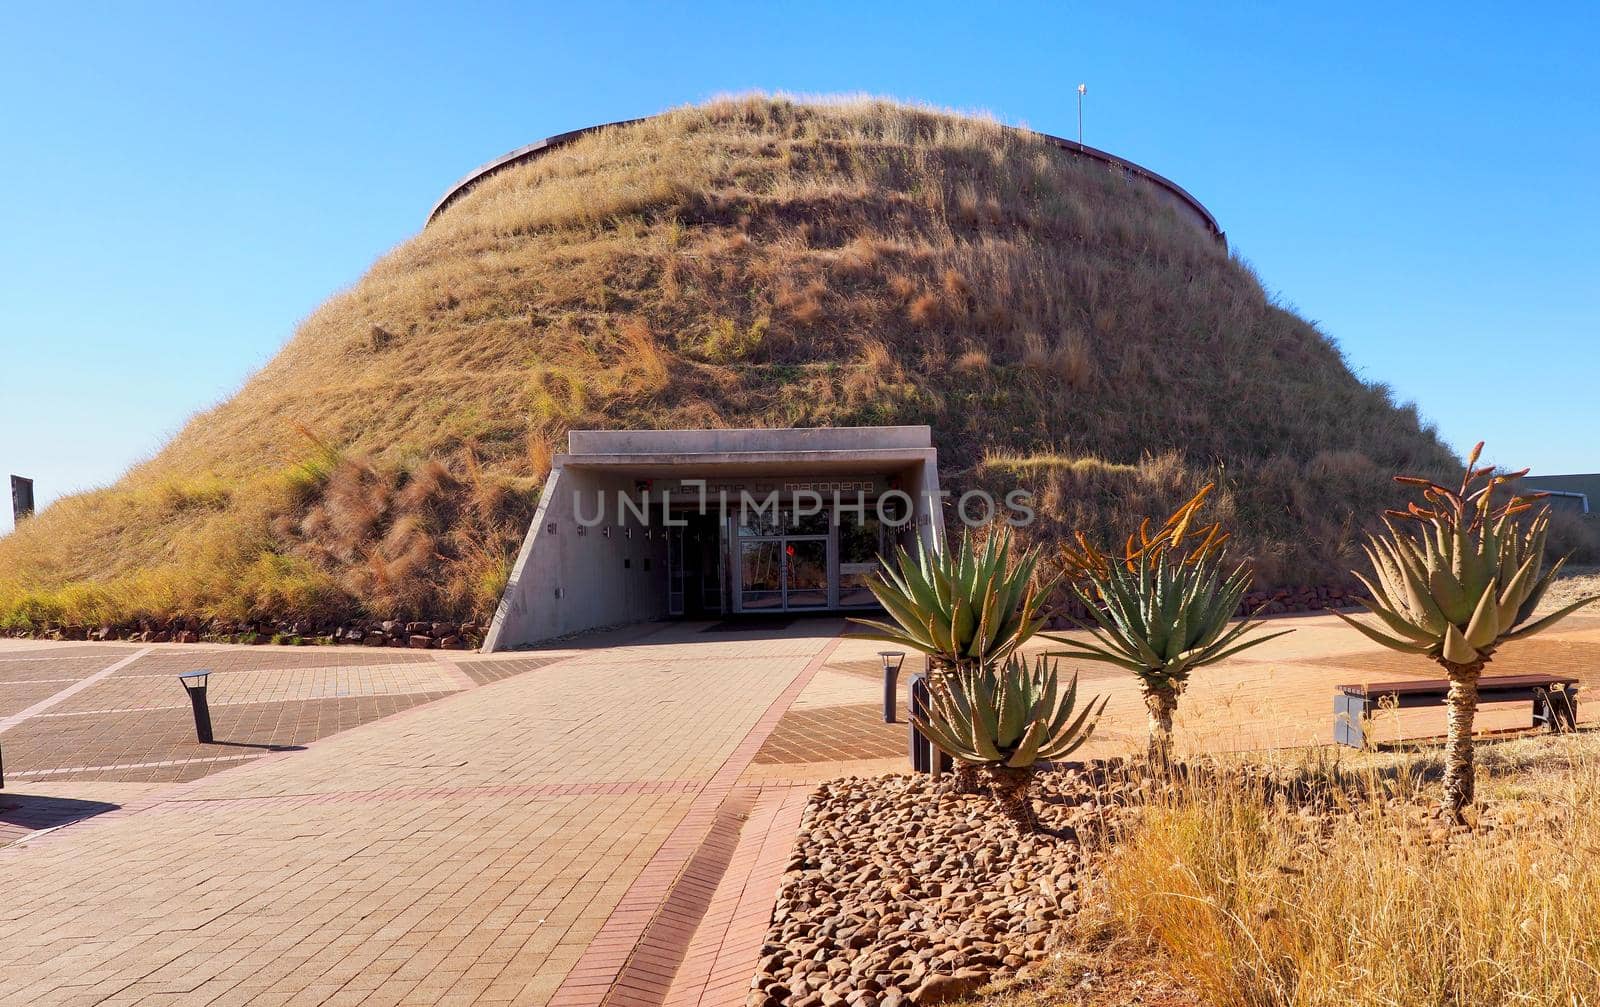 2 July 2019 - Maropeng, Johannesburg, South Africa : The Maropeng Exhibition Centre at the Cradle of Humankind, Johannesburg, South Africa